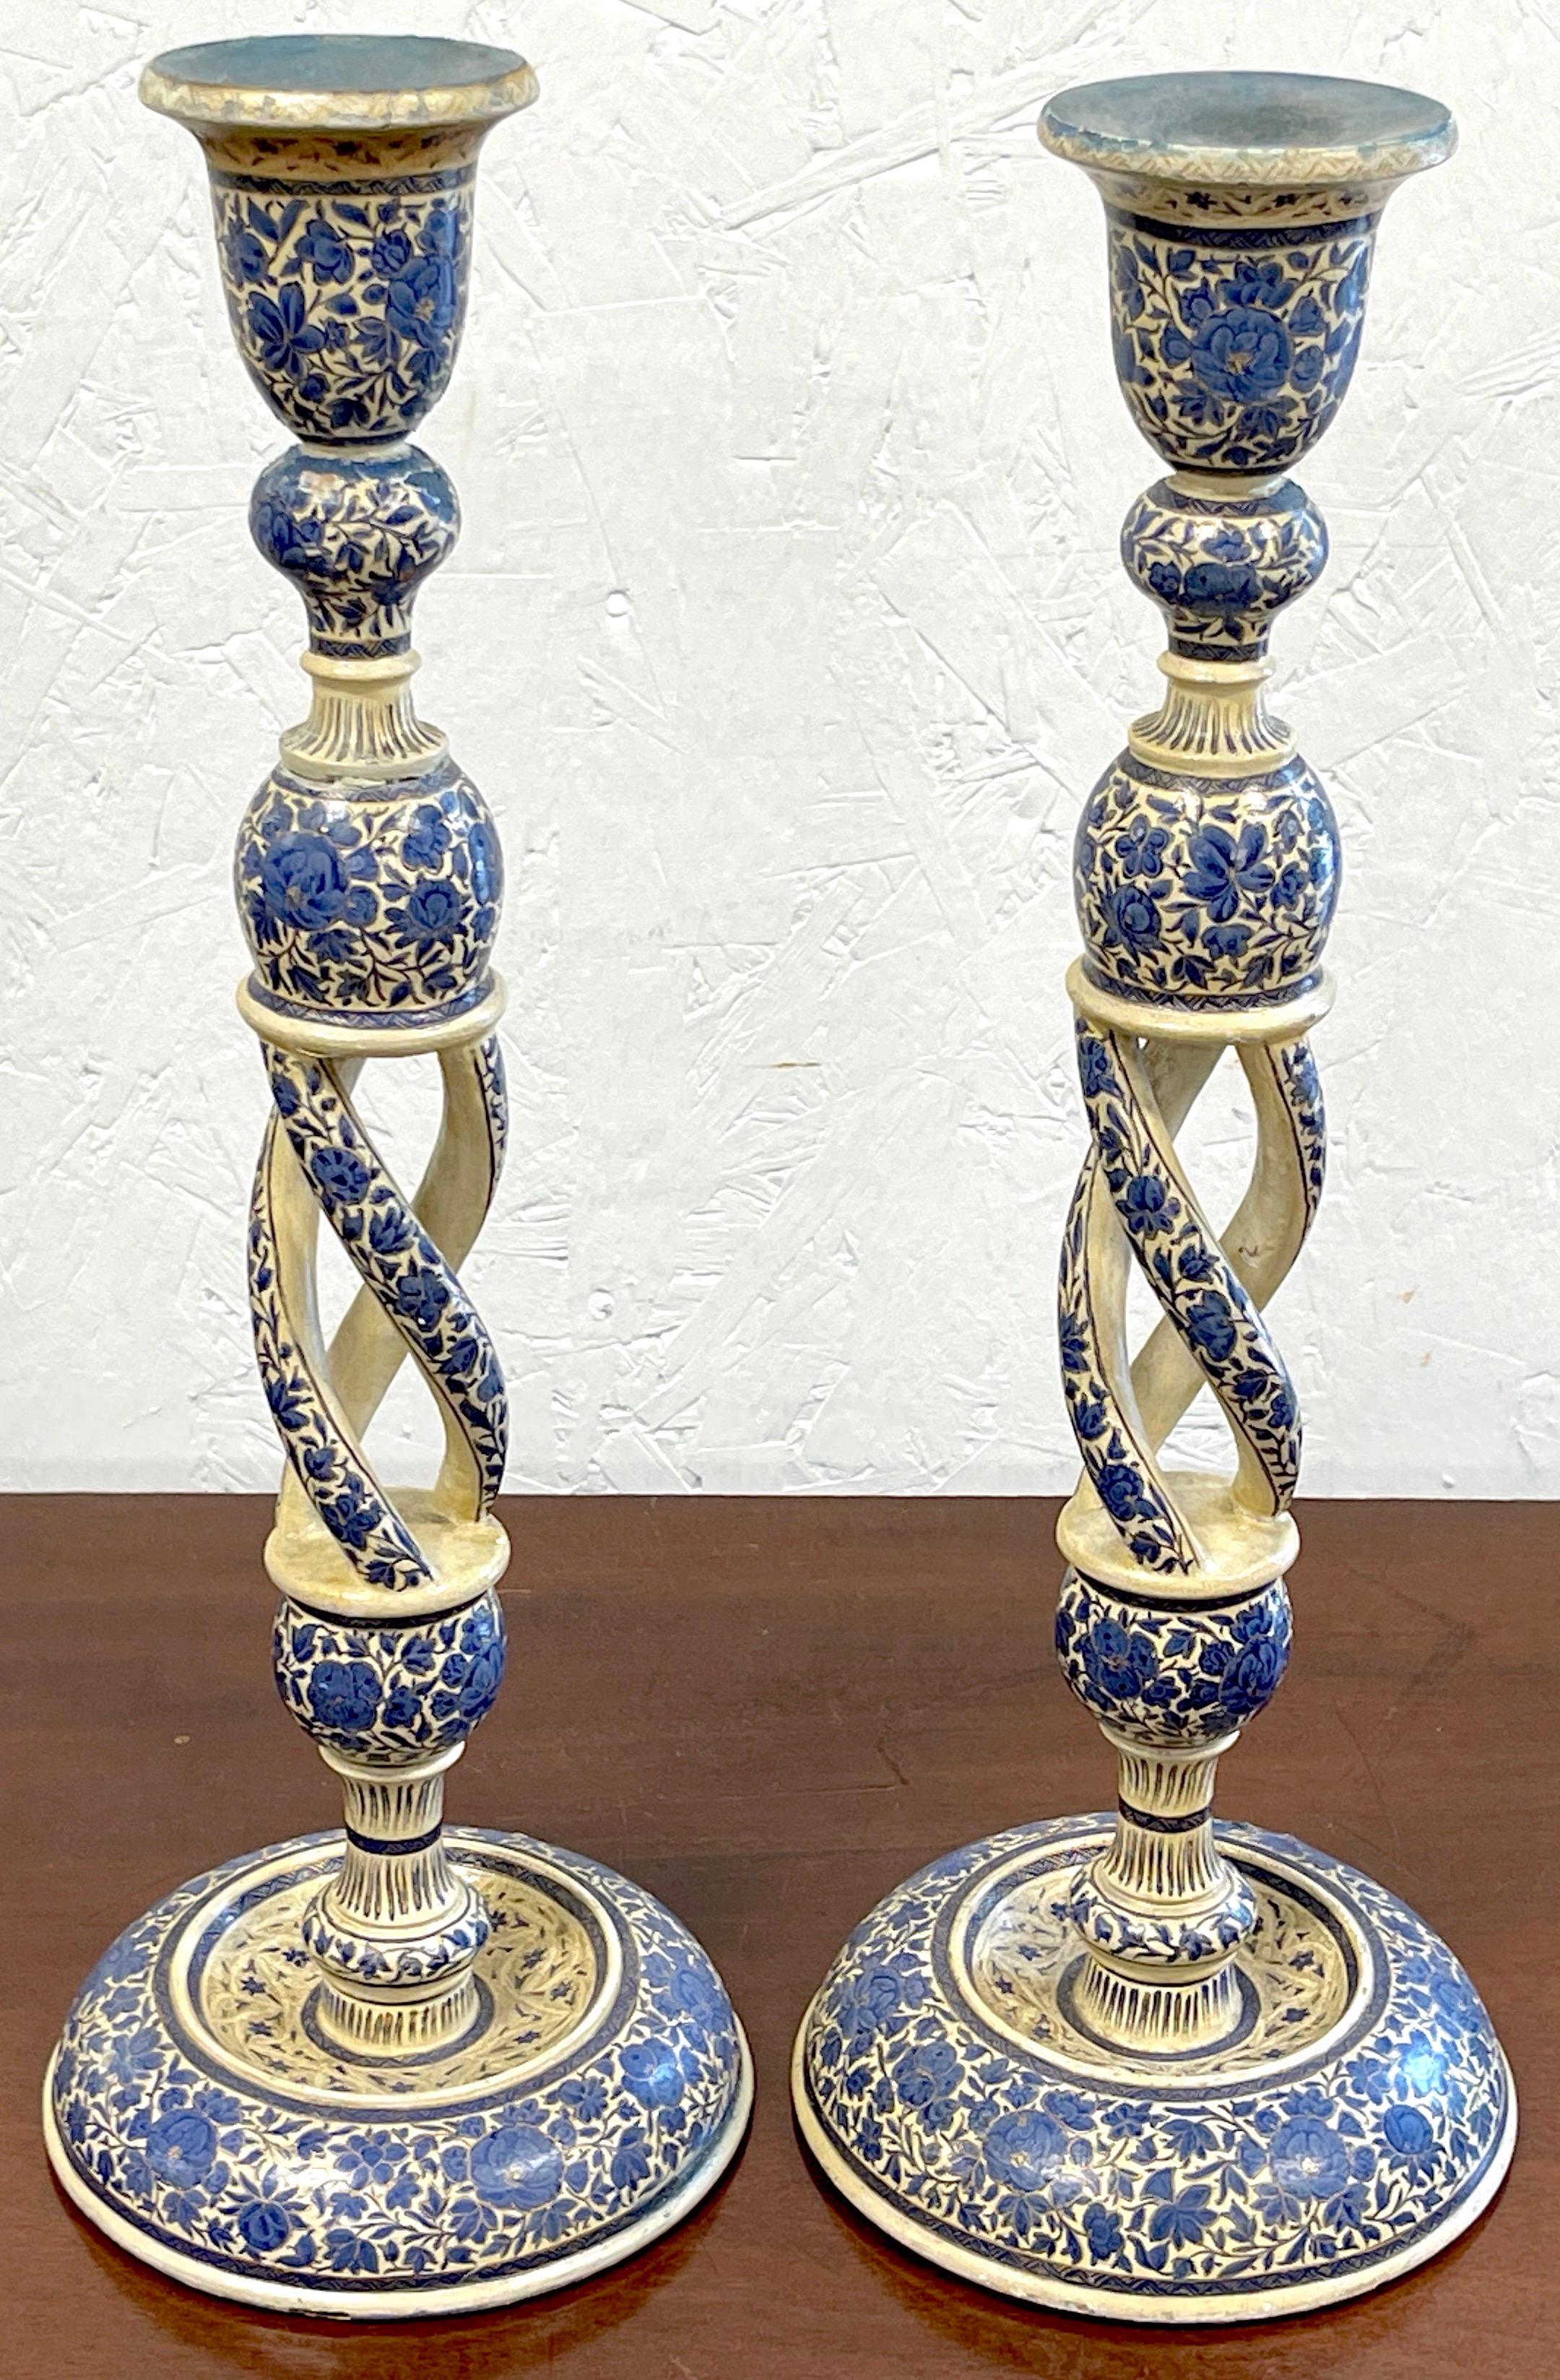 Pair of Large Antique Kashmiri Blue & White Candlesticks
India, Circa 1890s
Pair of exotic carved wood and lacquer candlesticks with spiral columns decorated in traditional Kashmiri off white and blue floral motif.